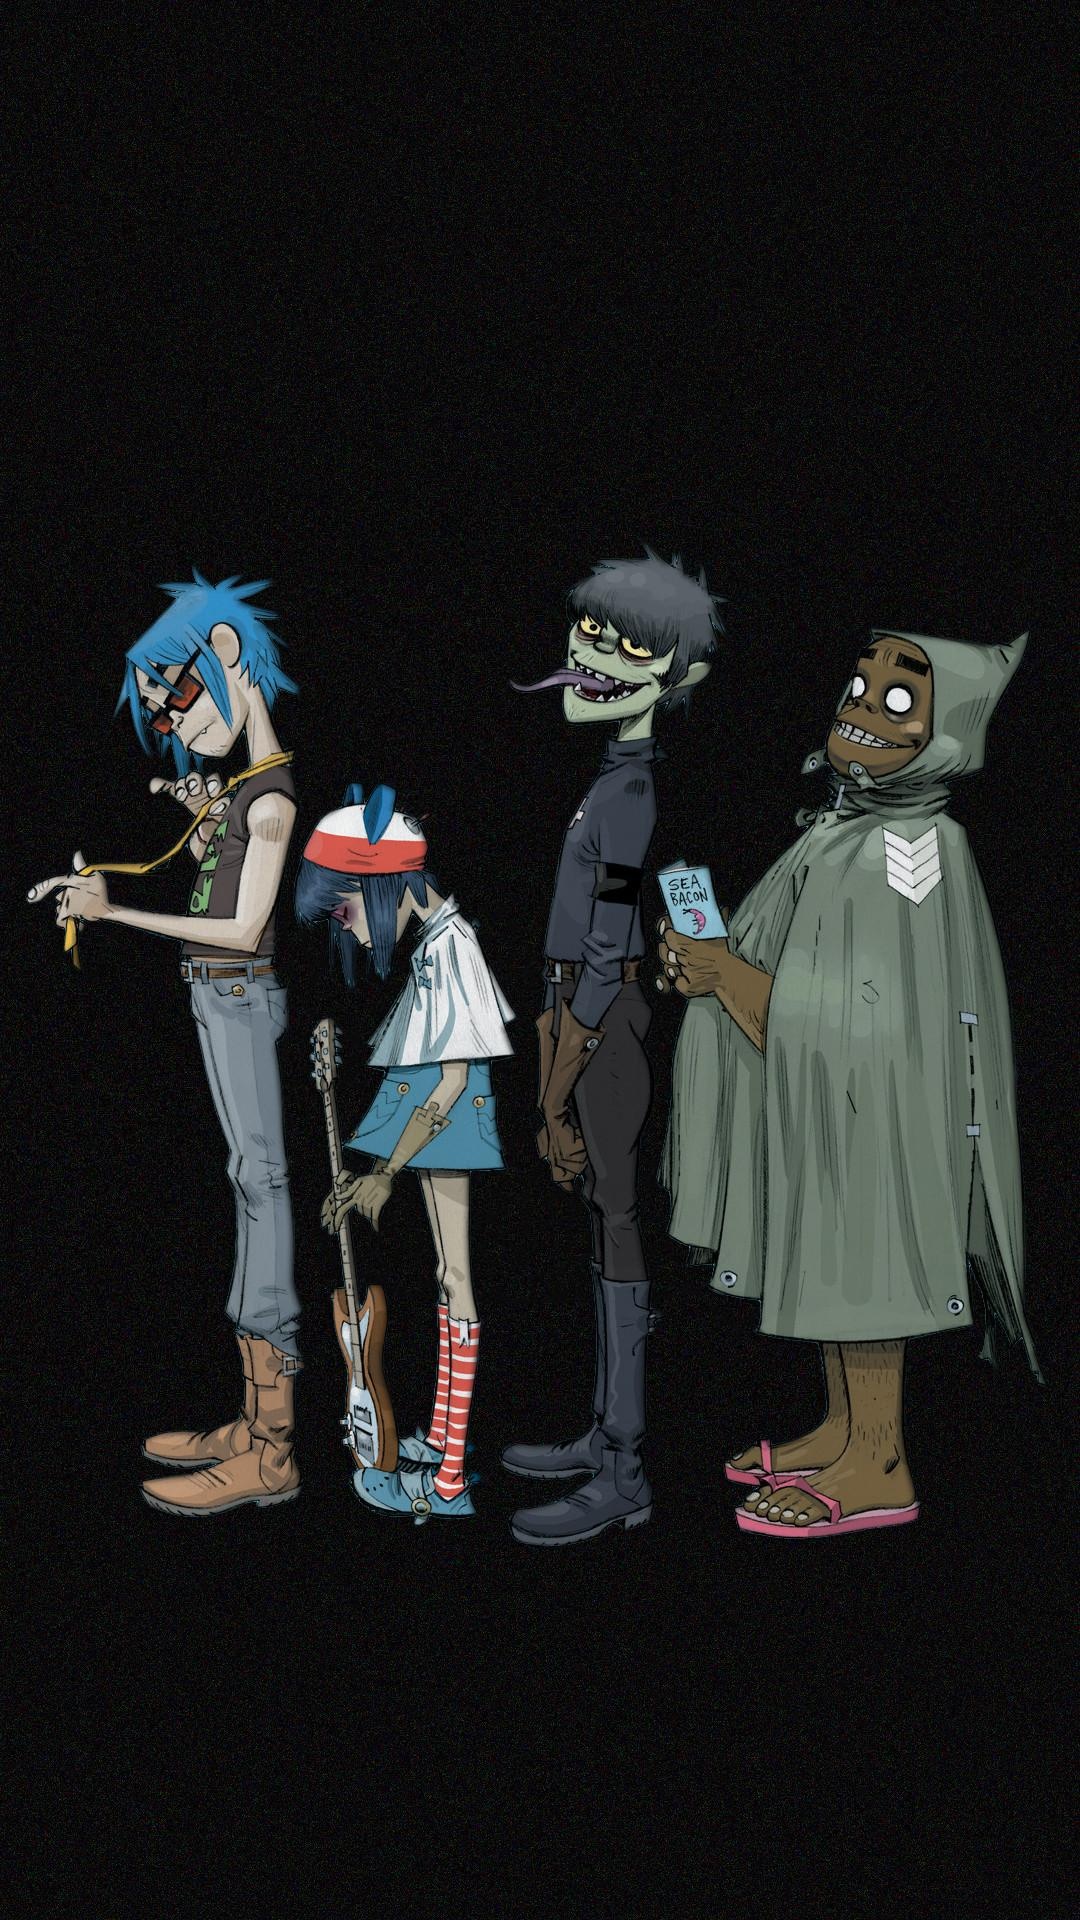 Gorillaz: Virtual group known for variety and genre blending, 2D, Murdoc, Noodle and Russel. 1080x1920 Full HD Background.